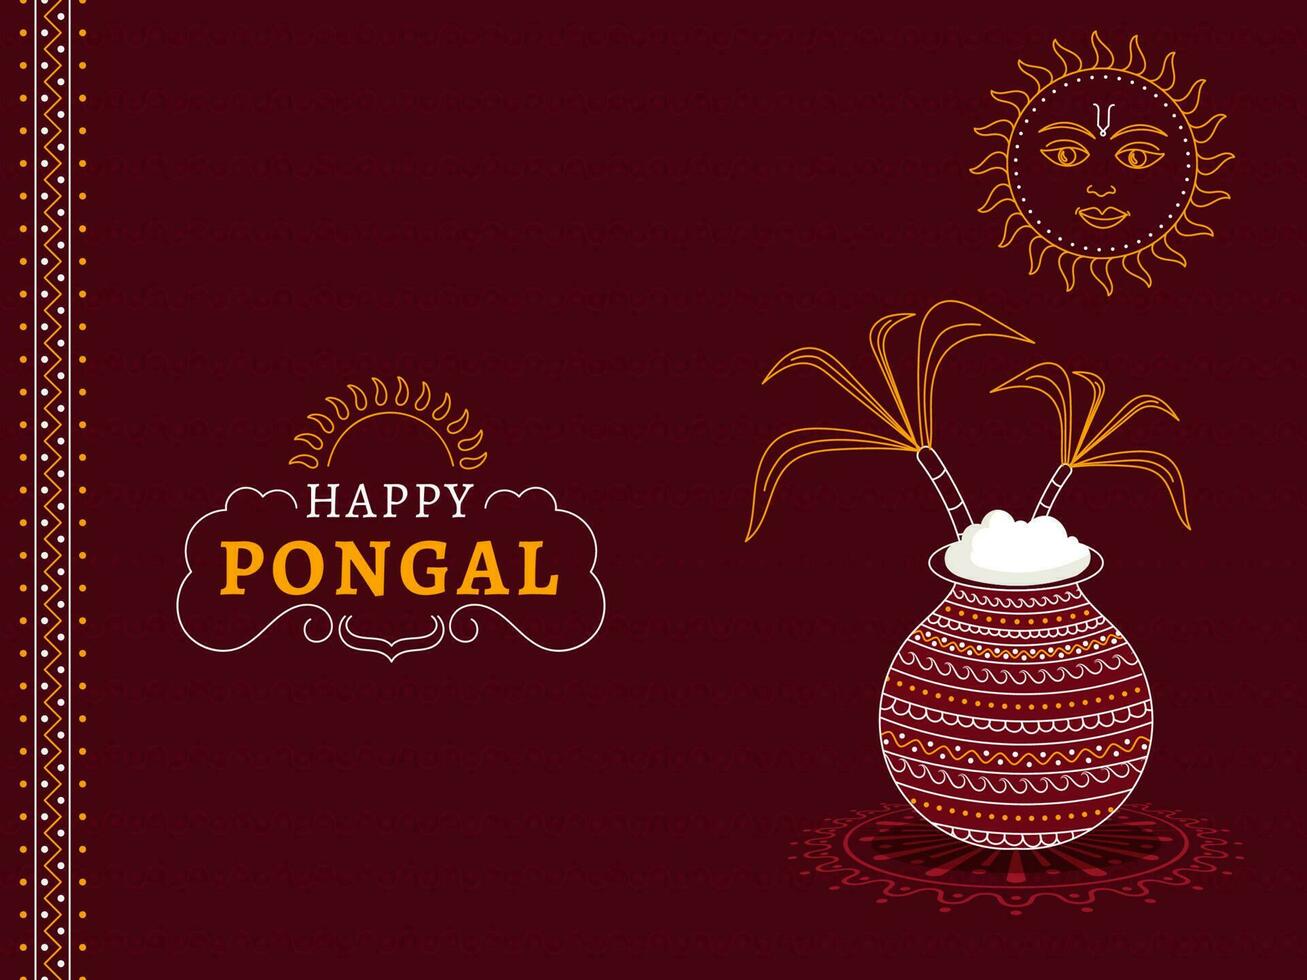 Happy Pongal Celebration Concept With Traditional Dish In Clay Pot, Sugarcanes And Sun Face On Maroon Background. vector